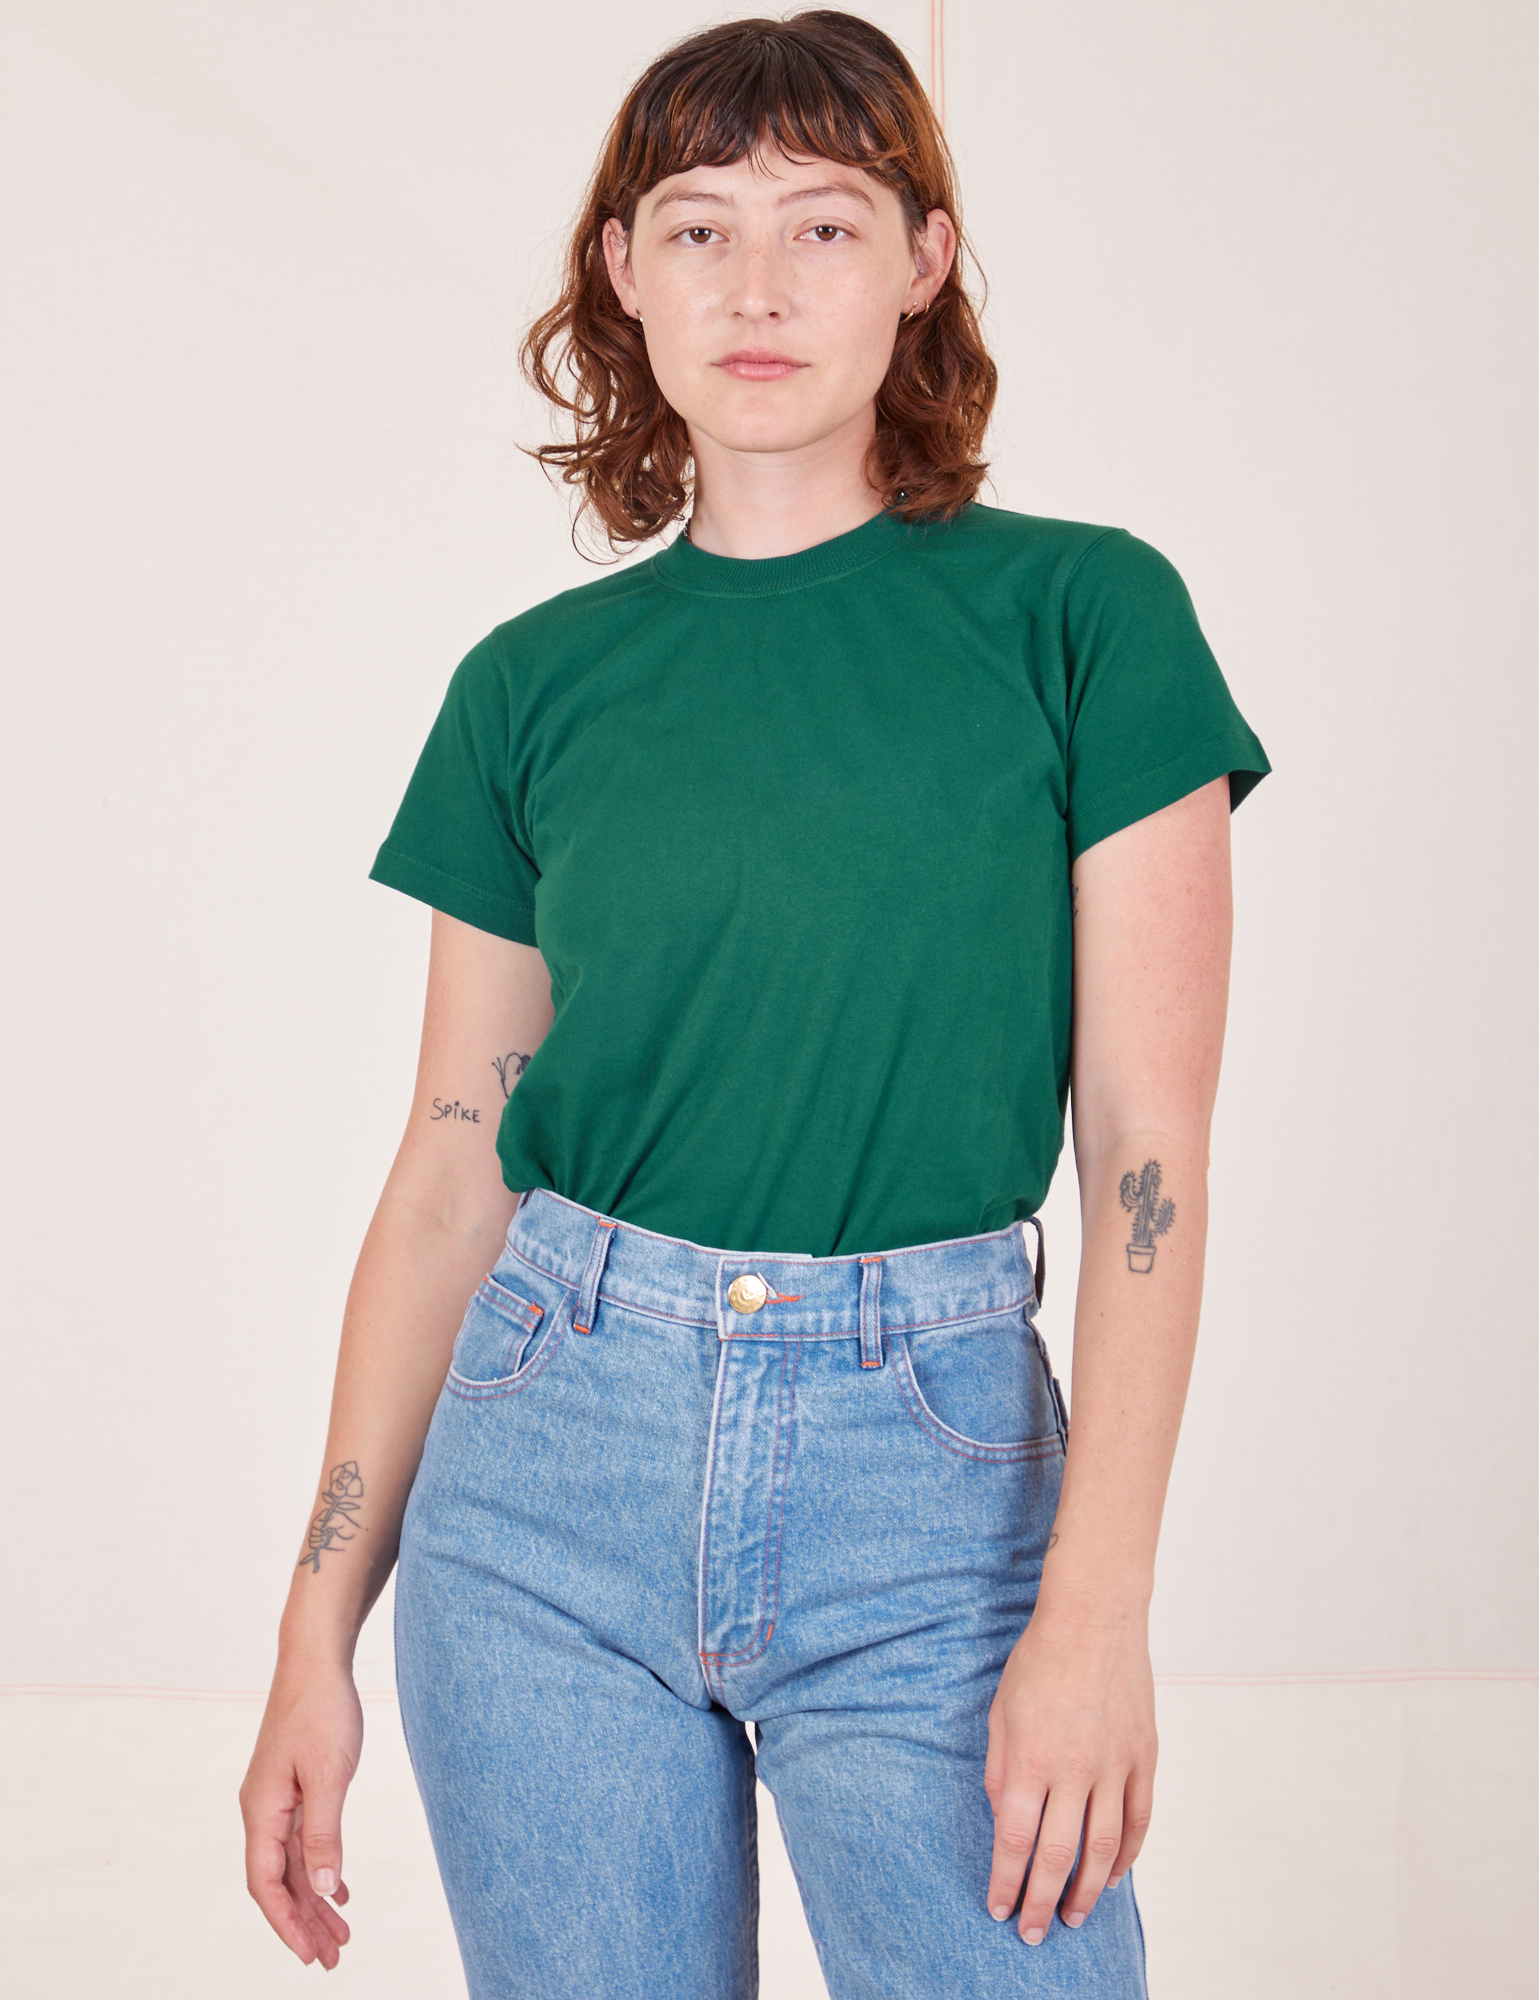 Alex is wearing Organic Vintage Tee in Hunter Green tucked into light wash Frontier Jeans